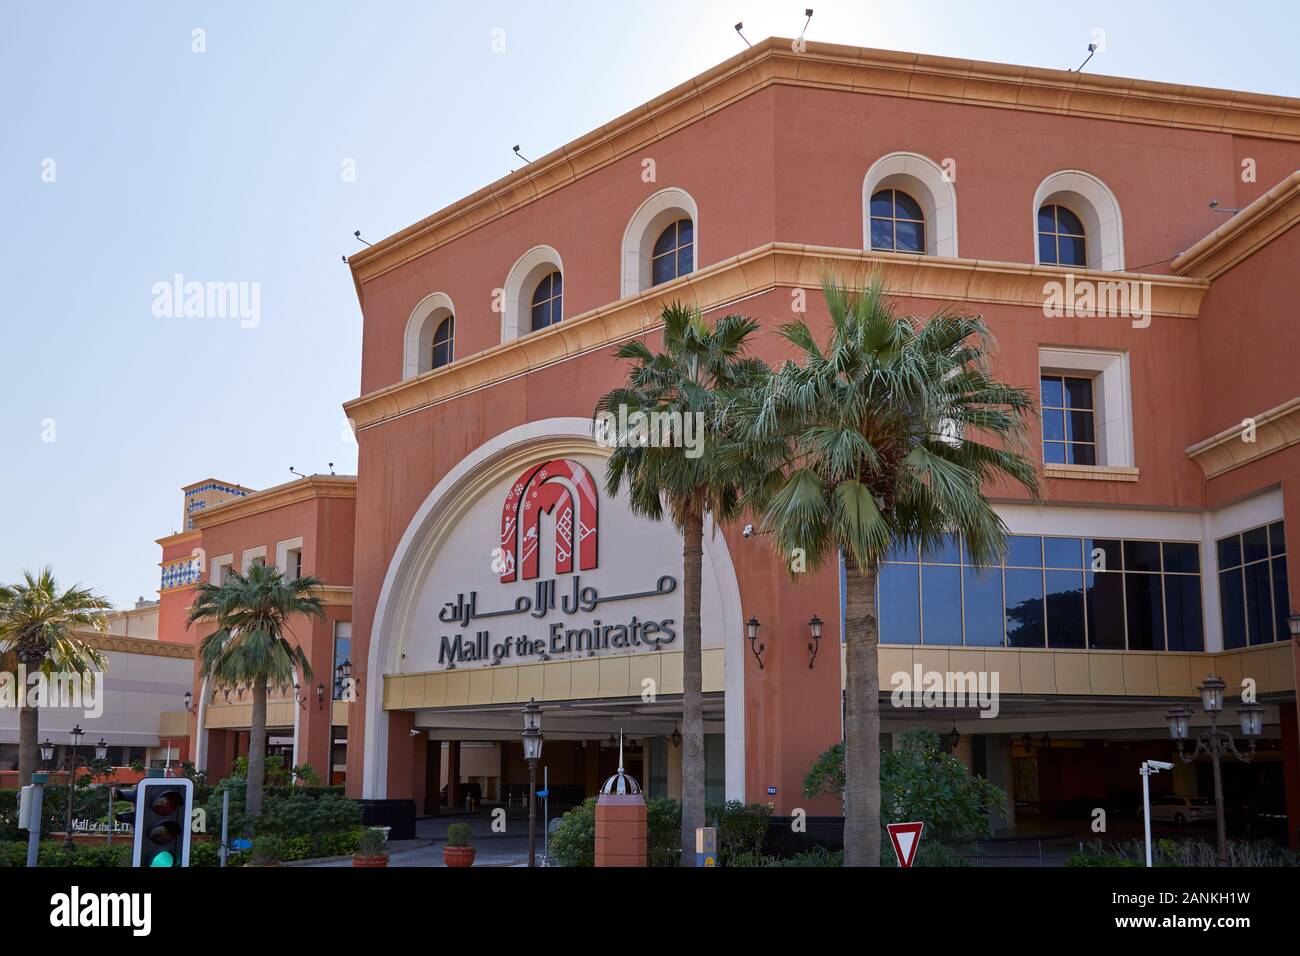 DUBAI, UNITED ARAB EMIRATES - NOVEMBER 22, 2019: Mall of the Emirates shopping center building with palm trees in a sunny day Stock Photo